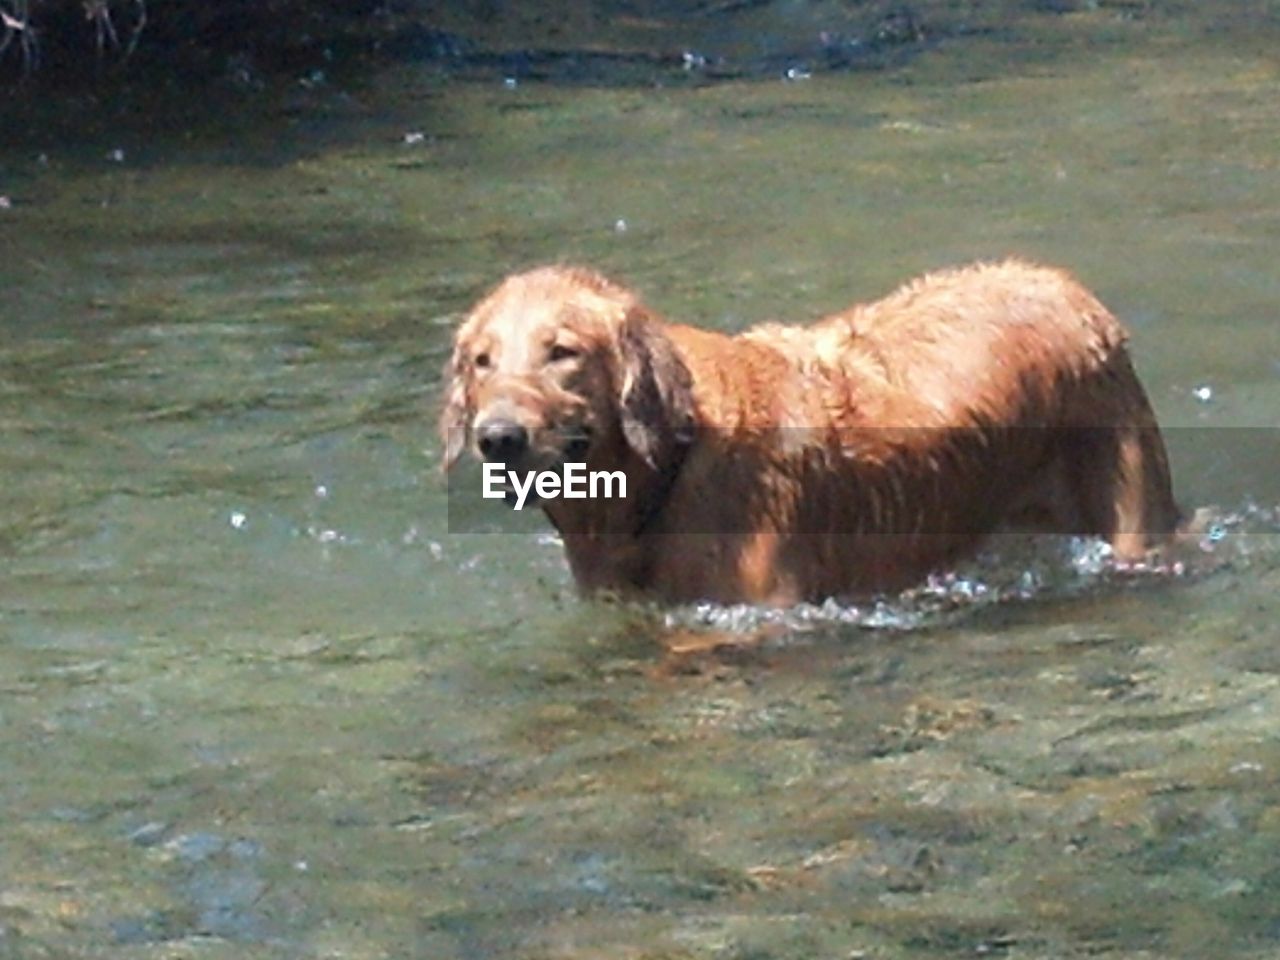 DOG STANDING IN WATER